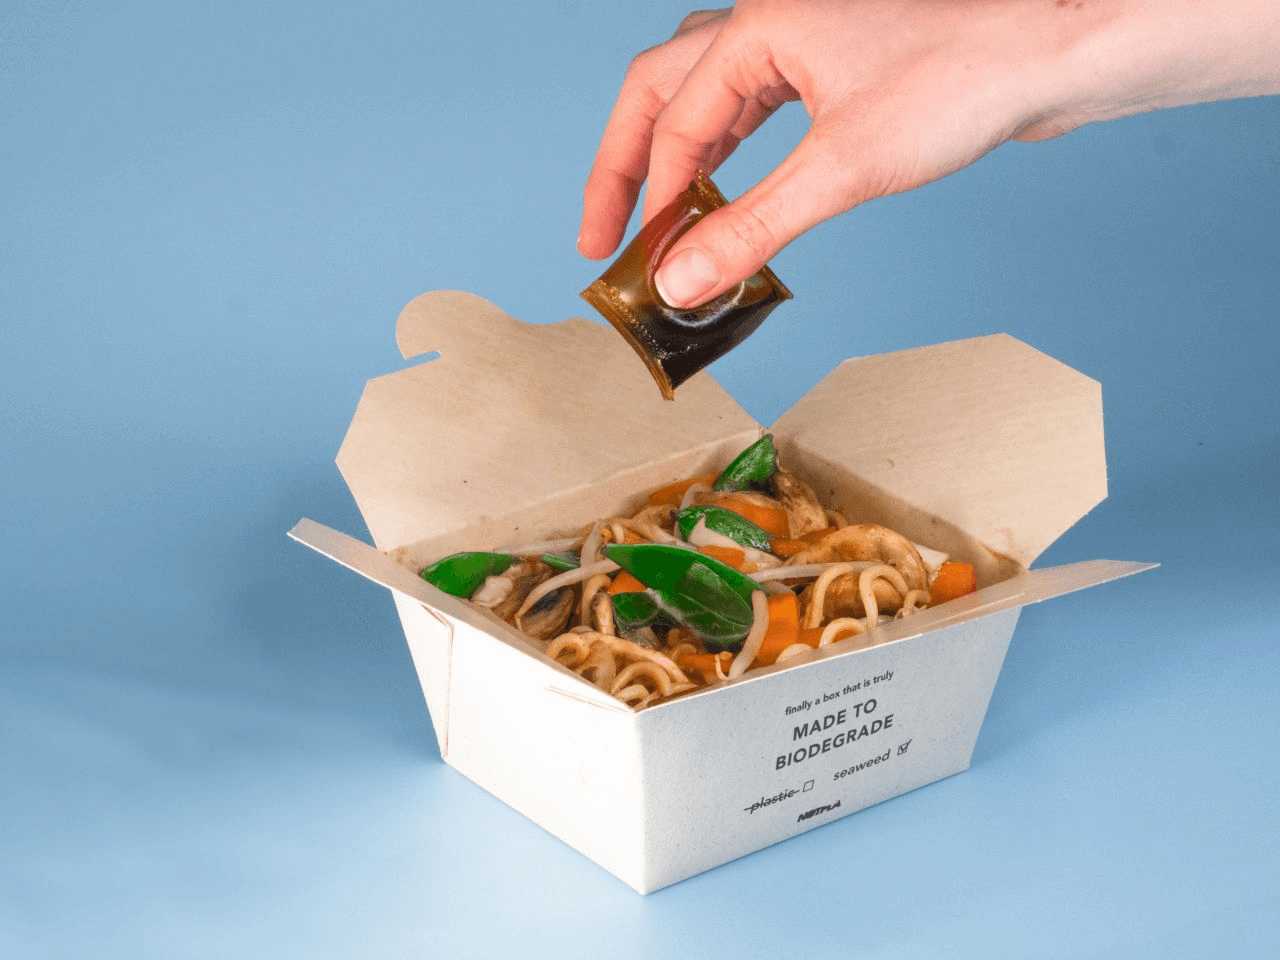 Fully biodegradable, seaweed-lined takeaway boxes.